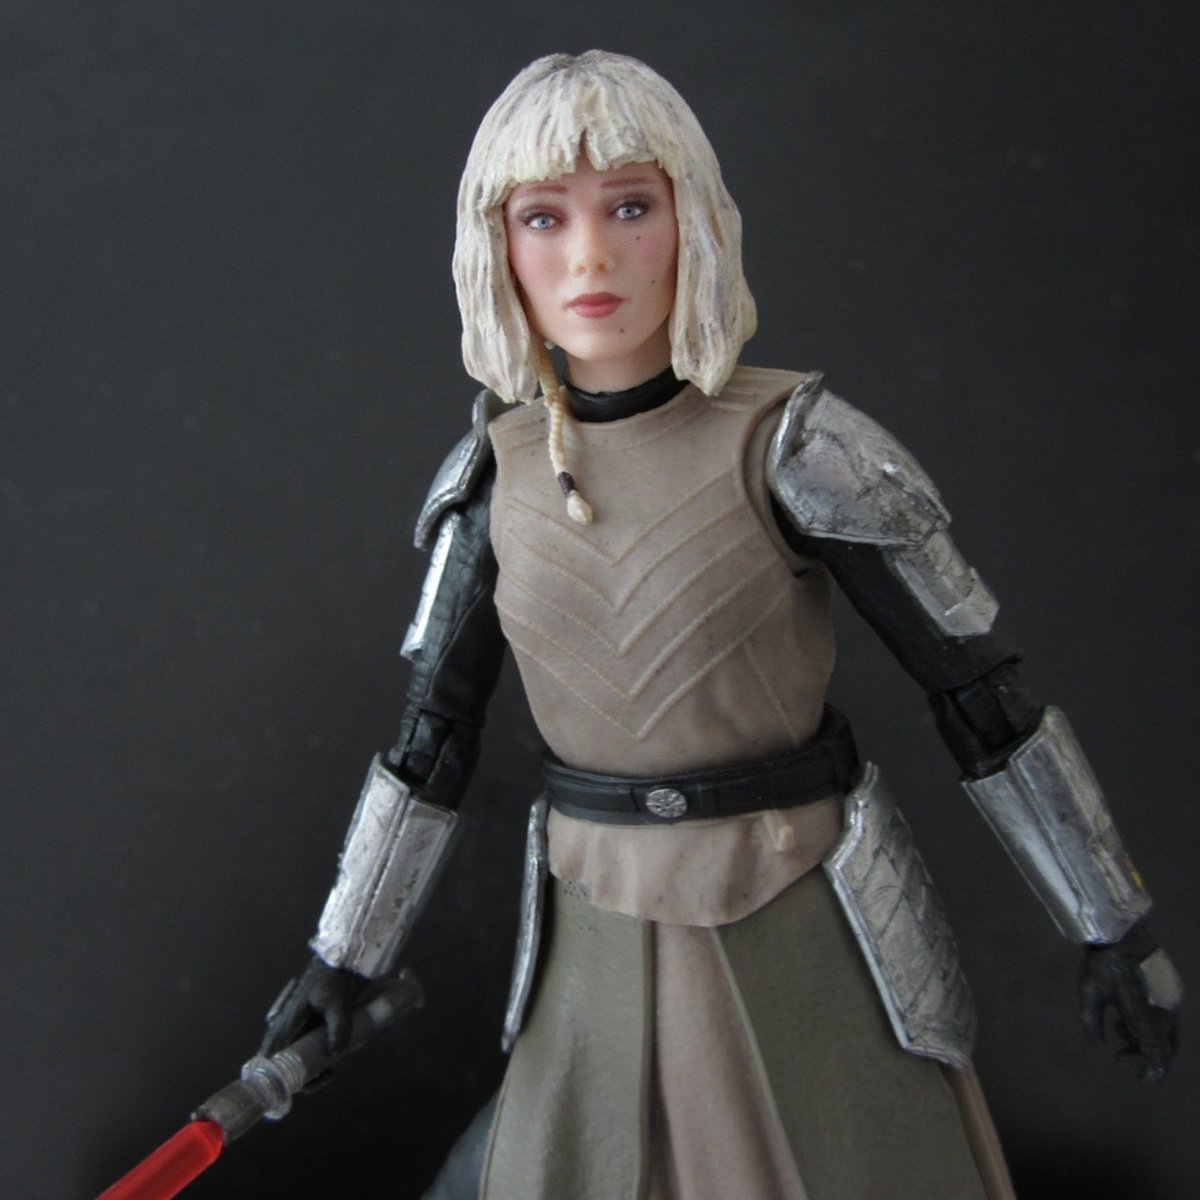 Upgrading the Black Series #ShinHati figure: repainted hair, trimmed bangs a bit, added dark roots & the band at end of braid. Also repainted armor bits & weathered them up.
----
#toyphotography #starwarstheblackseries #hasbrotoypic